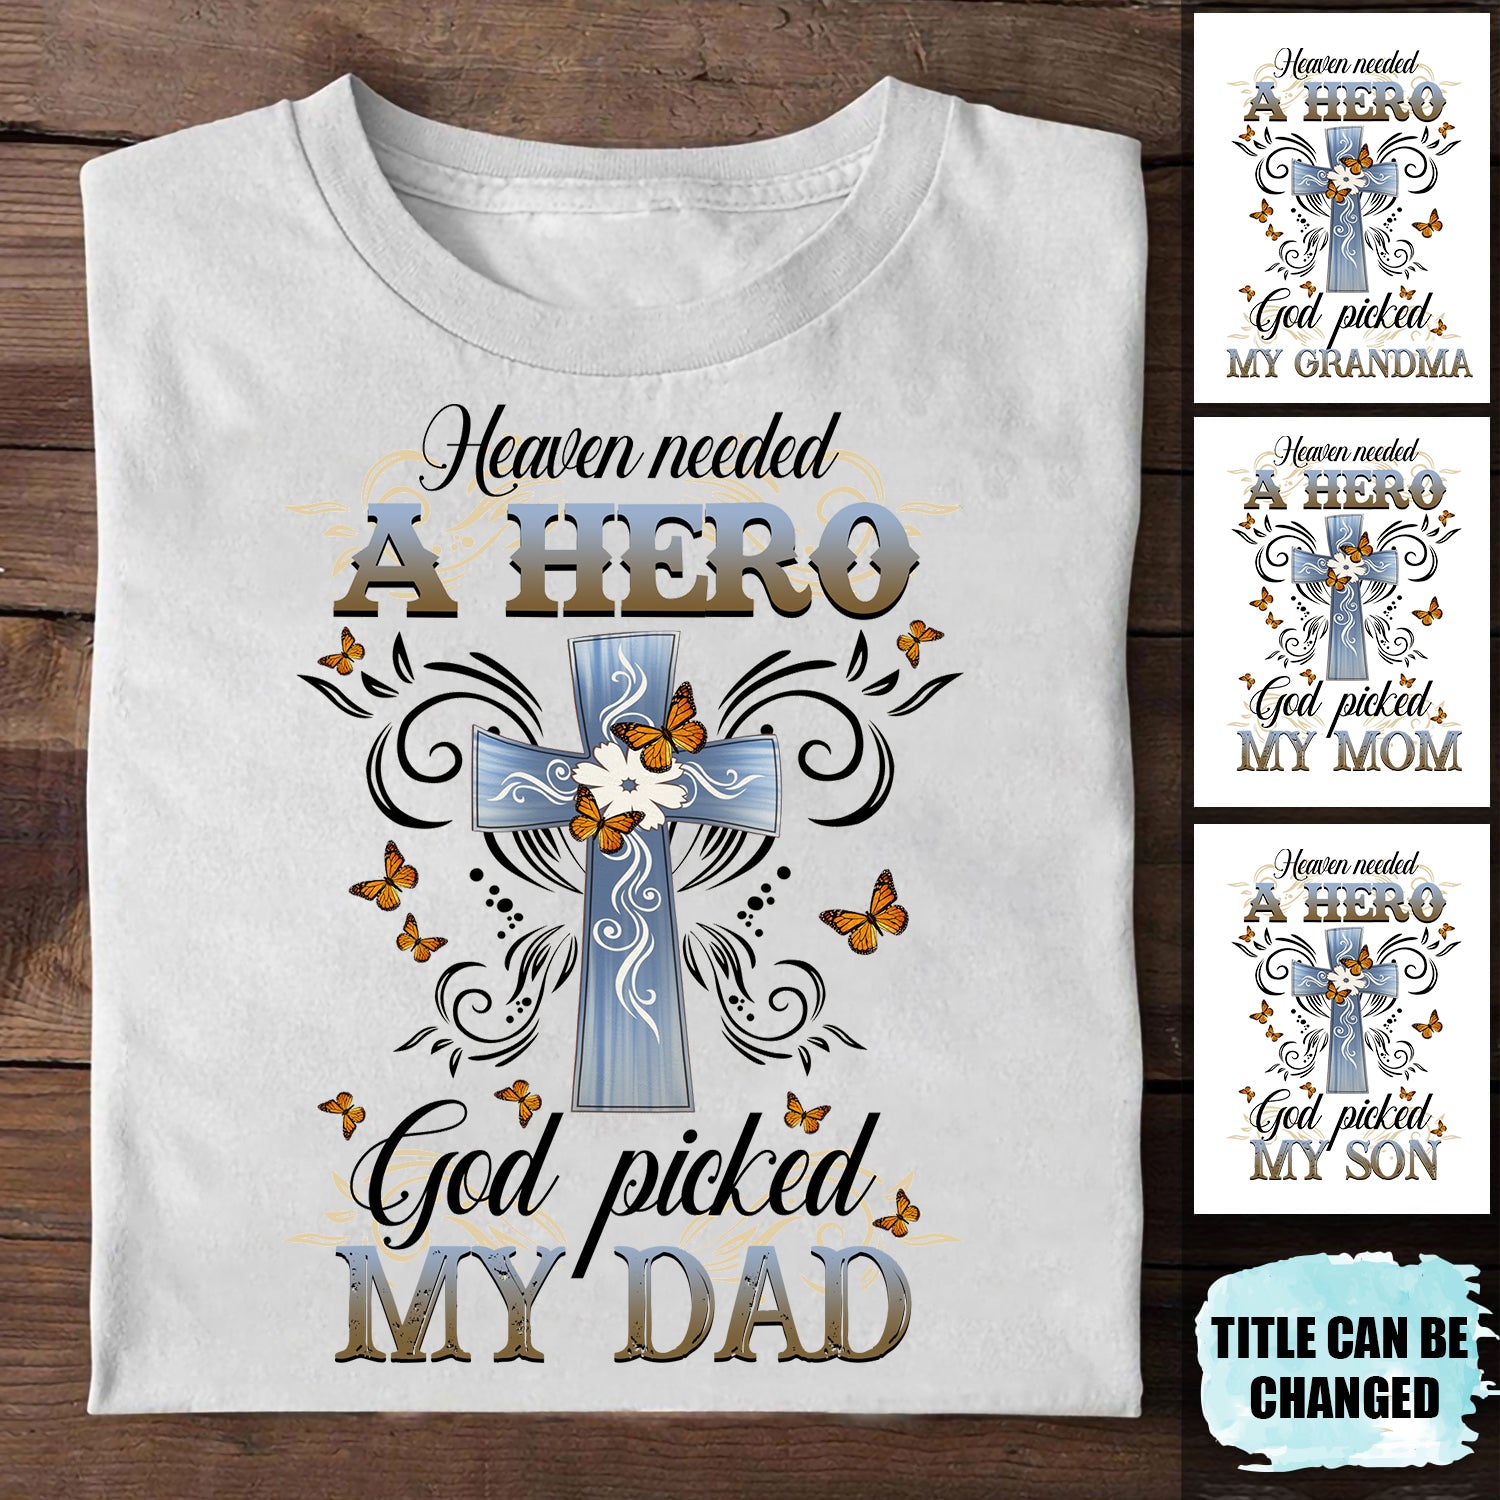 Heaven Needed A Hero Personalized T-shirt